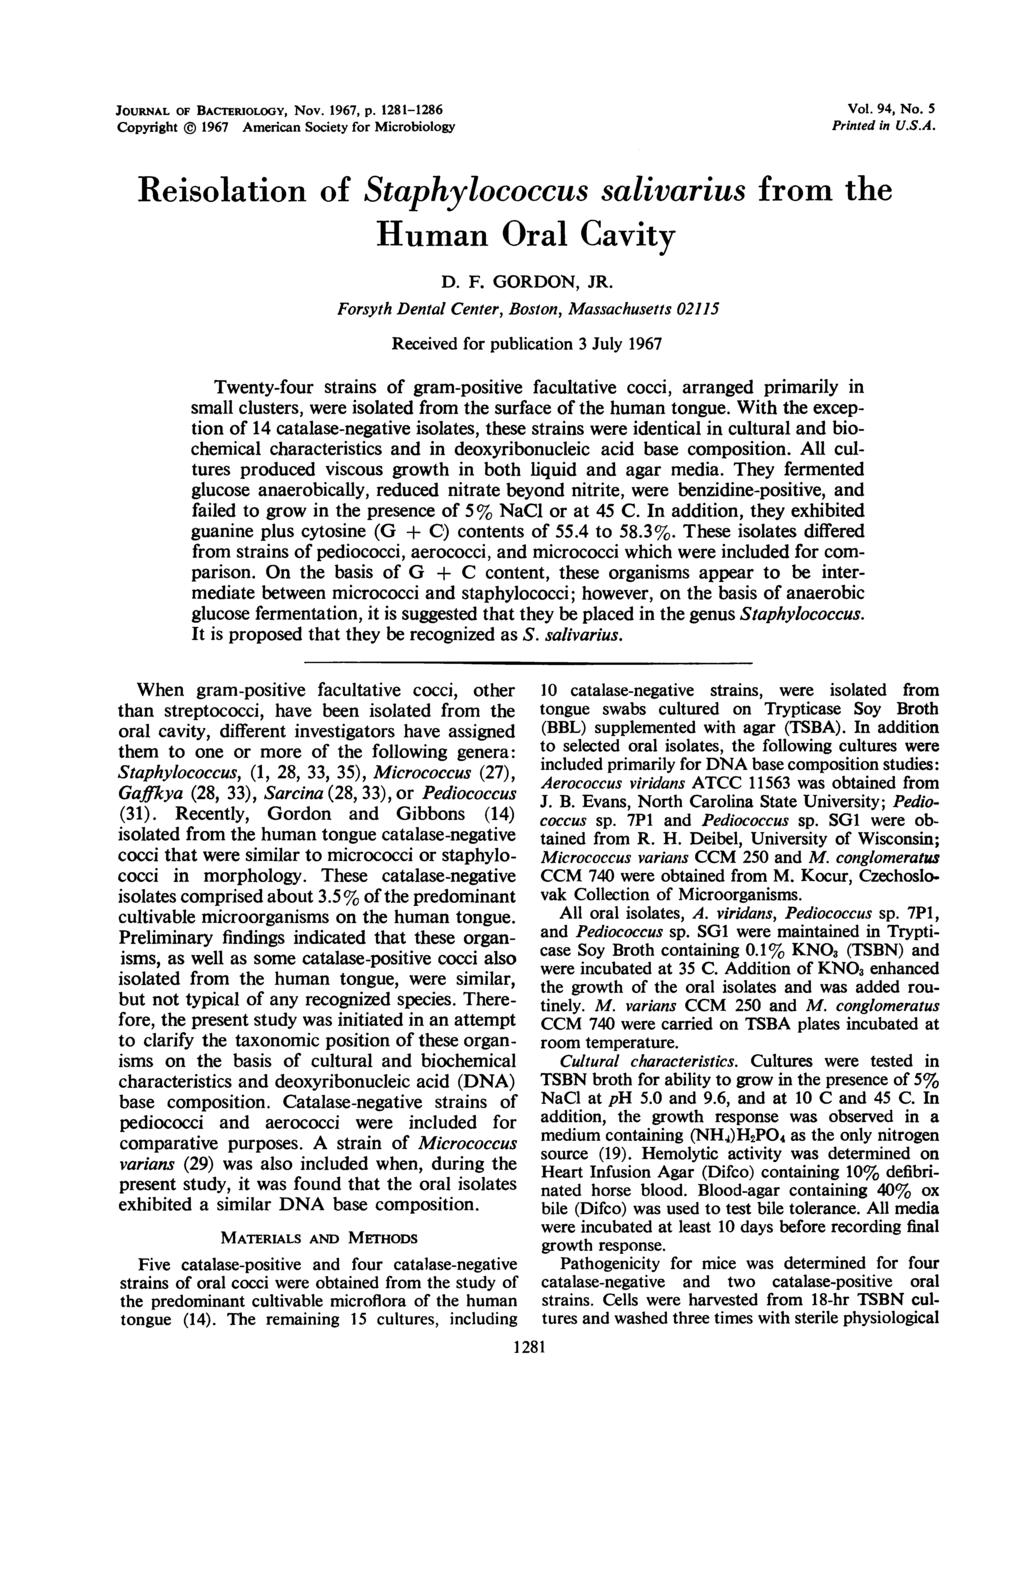 JOURNAL OF BACTERIOLOGY, Nov. 1967, p. 1281-1286 Vol. 94, No. 5 Copyright 1967 American Society for Microbiology Printed in U.S.A. Reisolation of Staphylococcus salivarius from the Human Oral Cavity D.